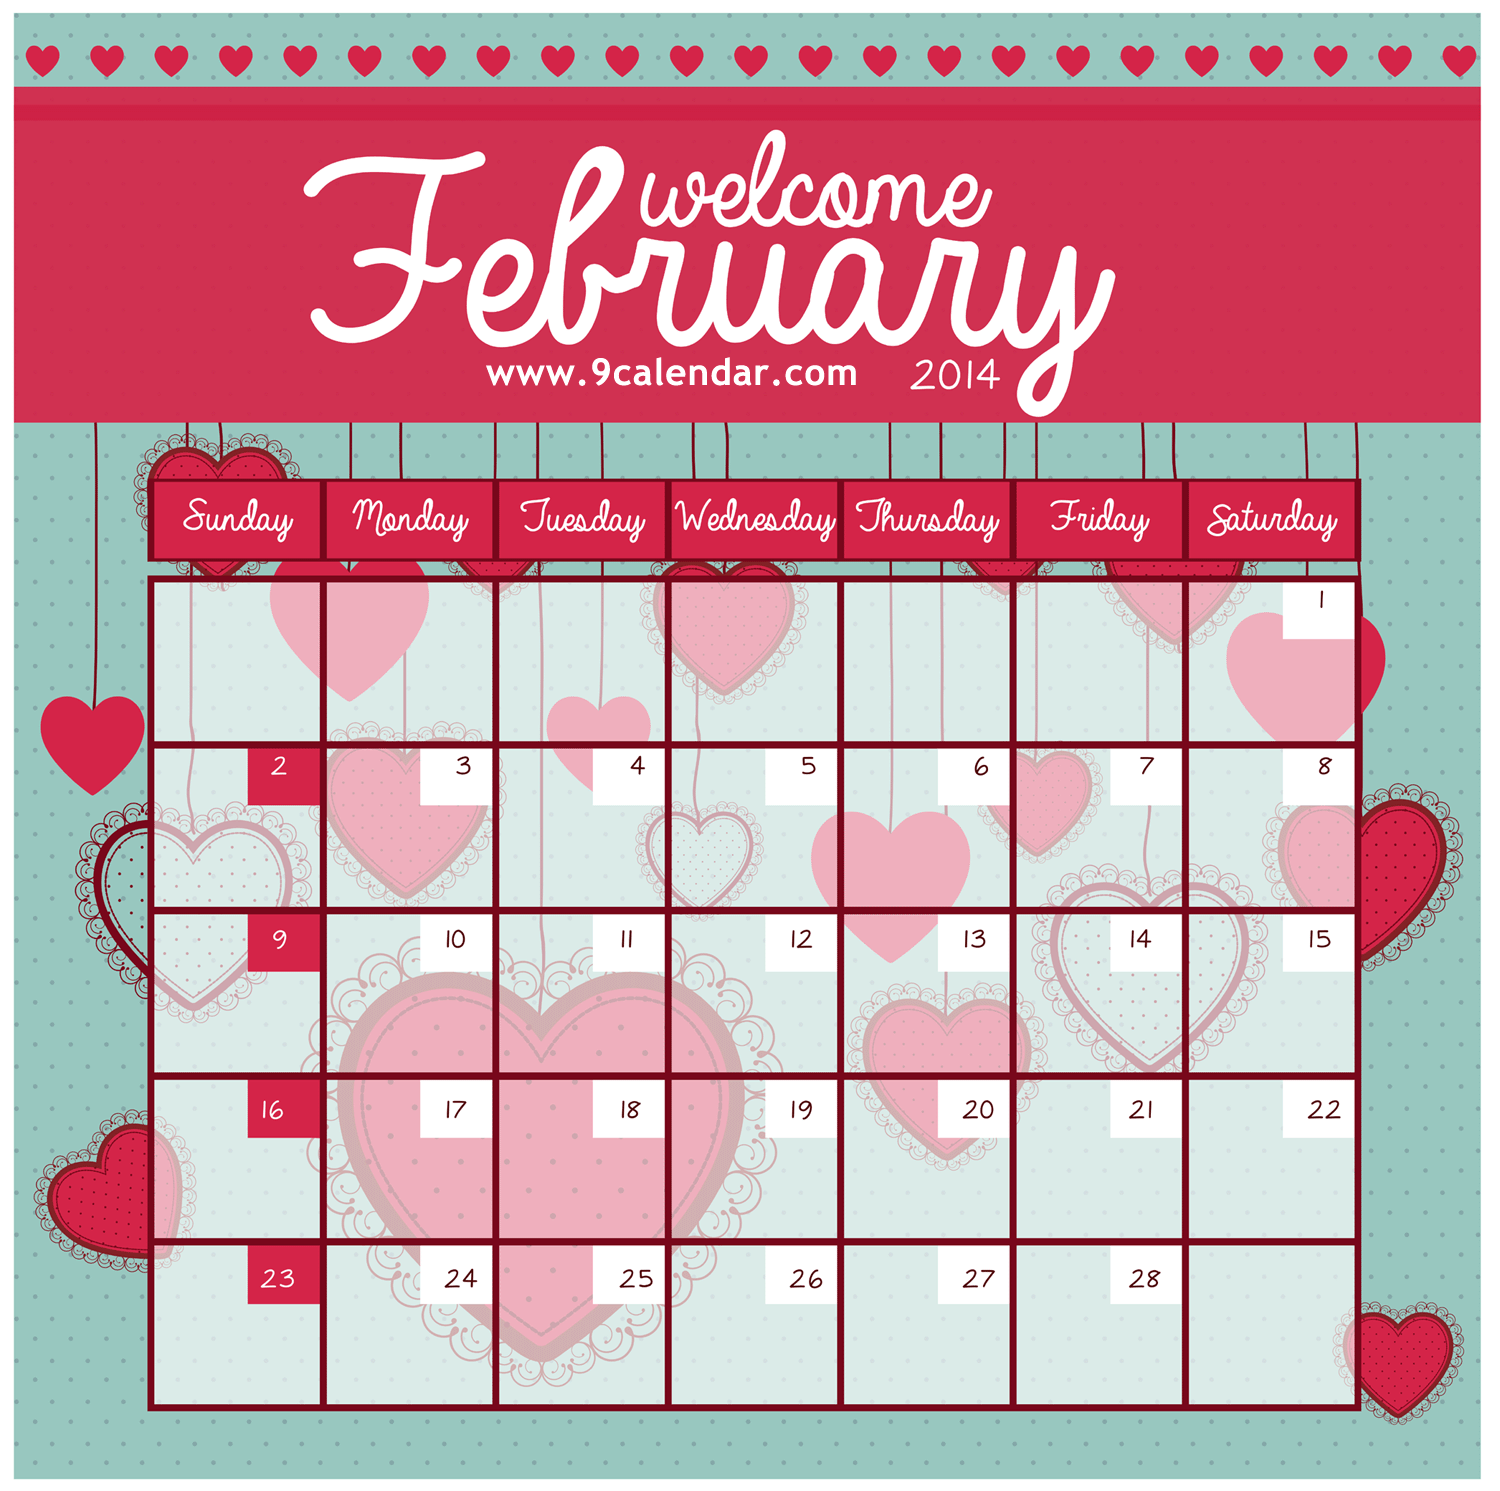 Of This Month Some Mind Blowing February Calendar Designs Are